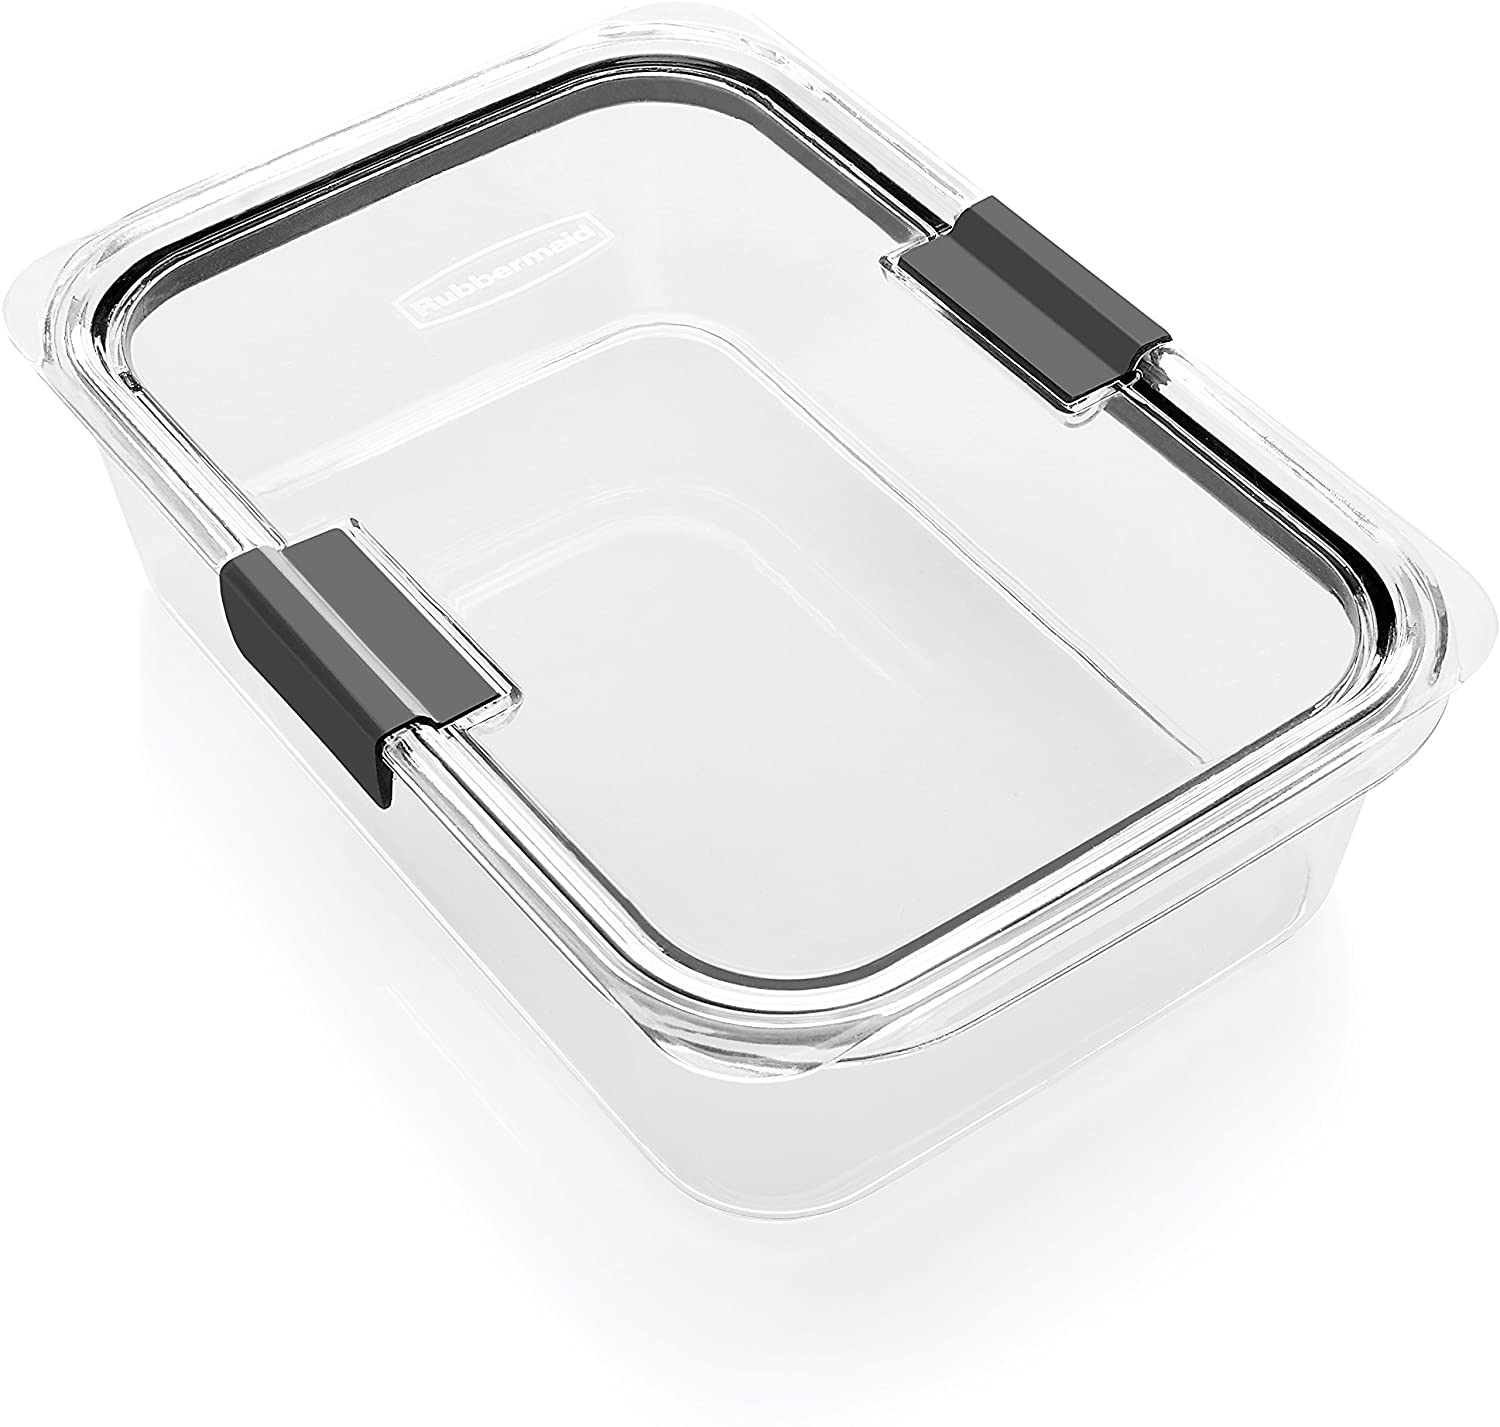 Rubbermaid Brilliance Food Storage Containers, 2.3 L - Whole and All